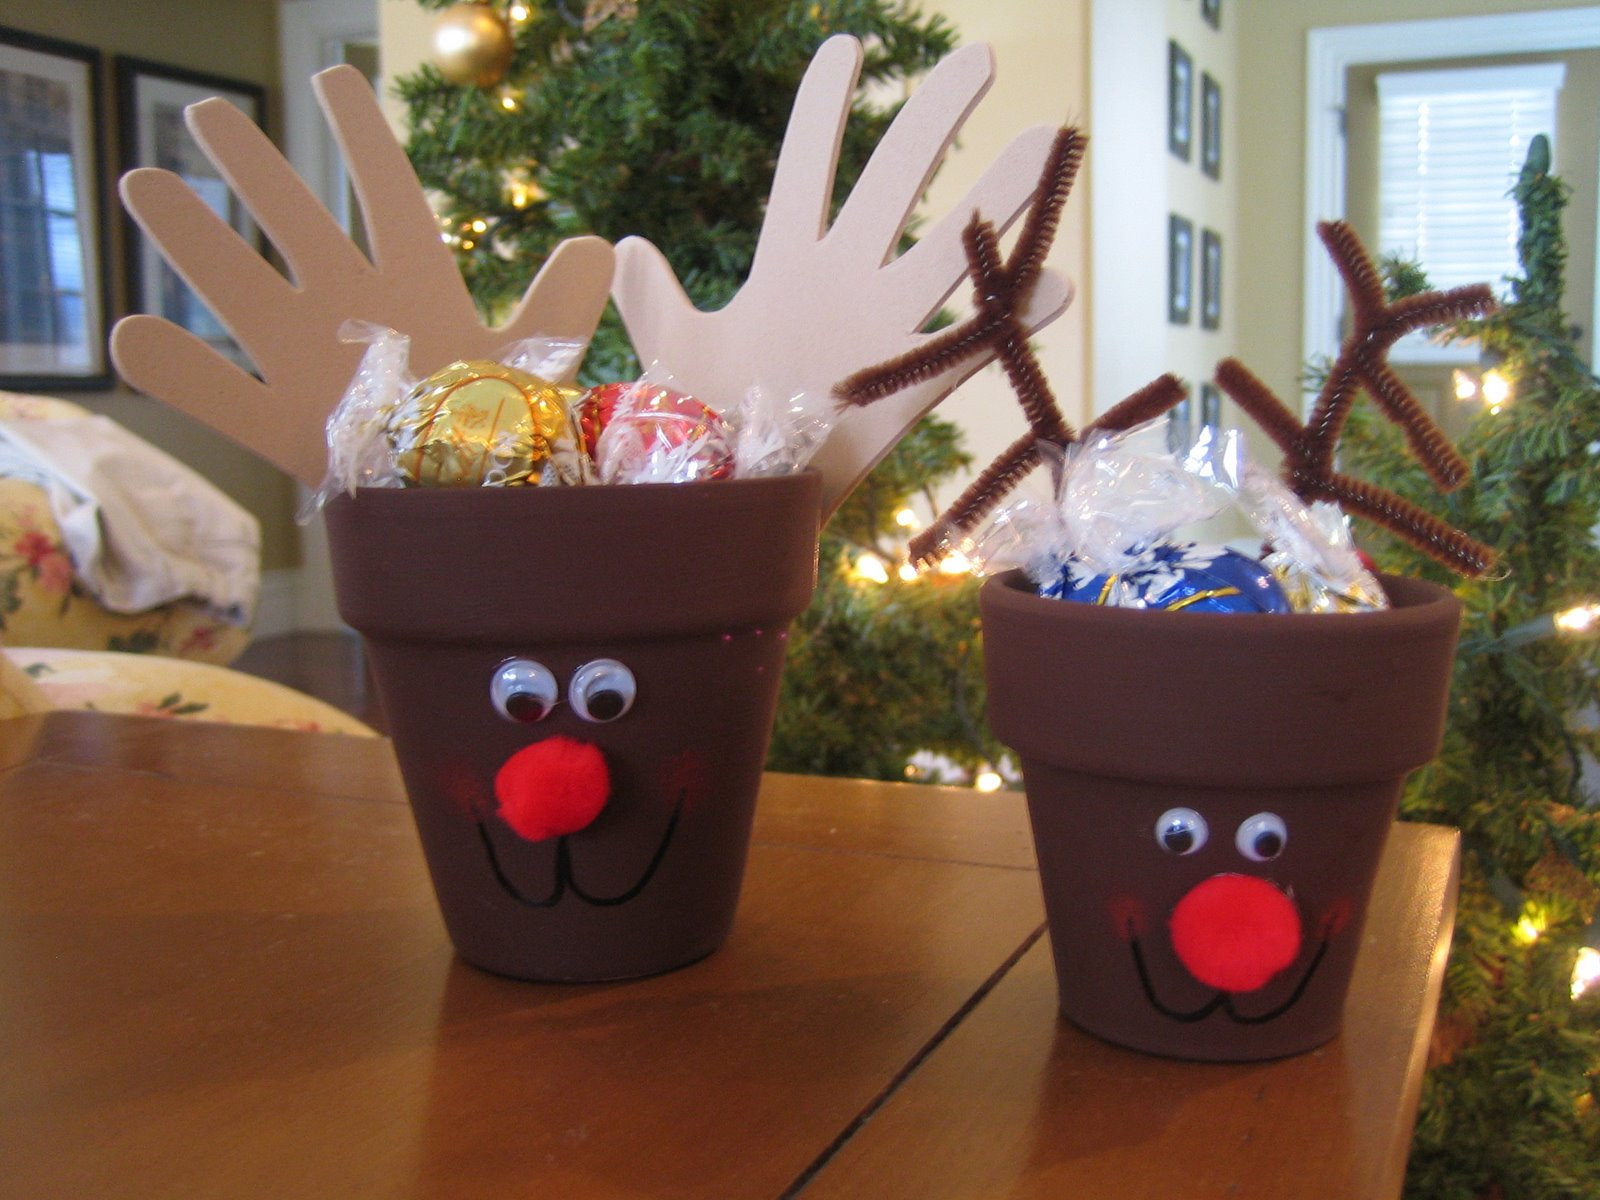 Holiday Craft Ideas For Toddlers
 “Fun Kids Christmas Craft Ideas”